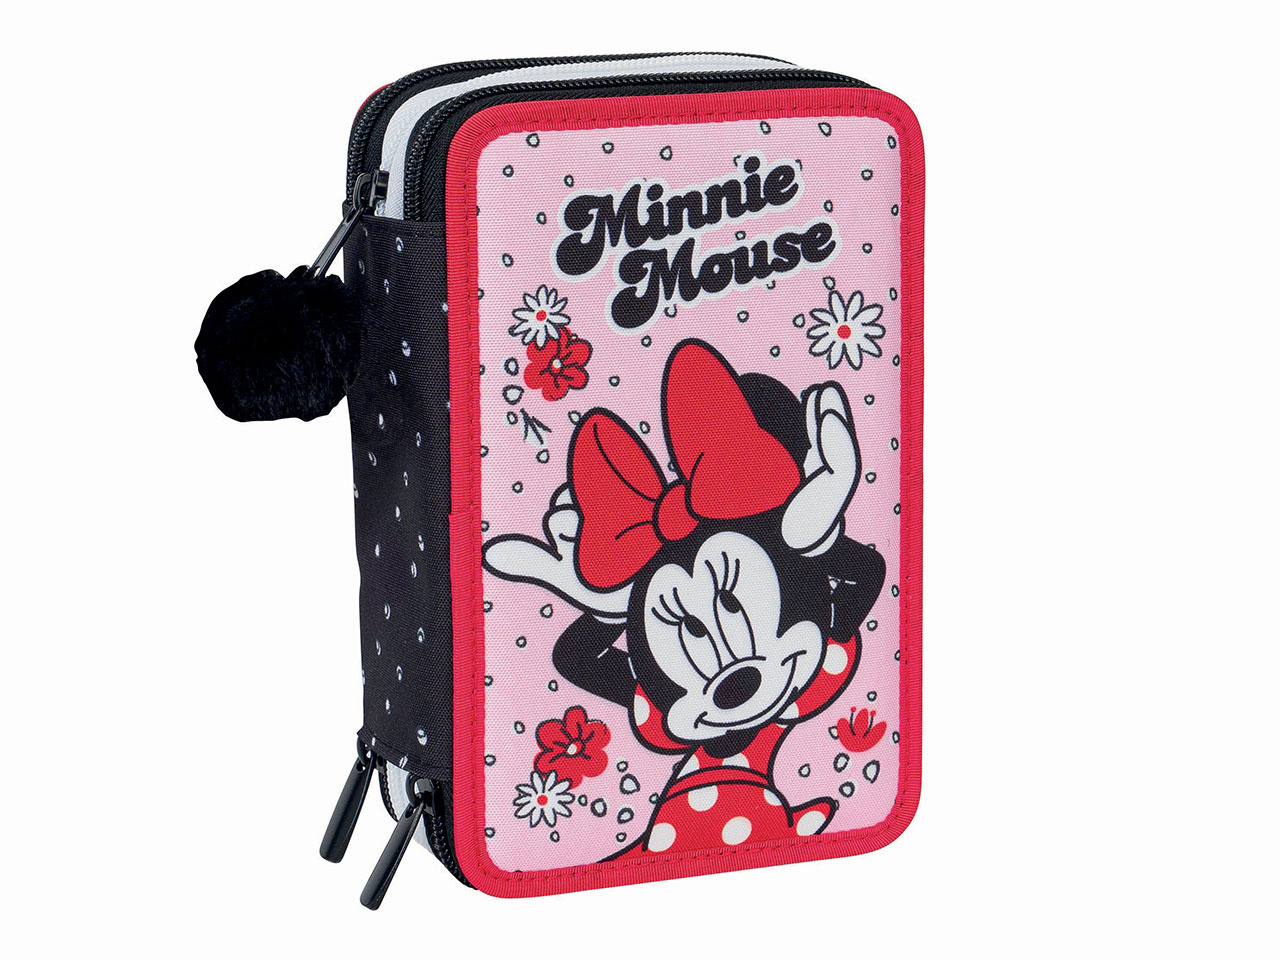 Minnie astuccio 3 zip m is for mouse